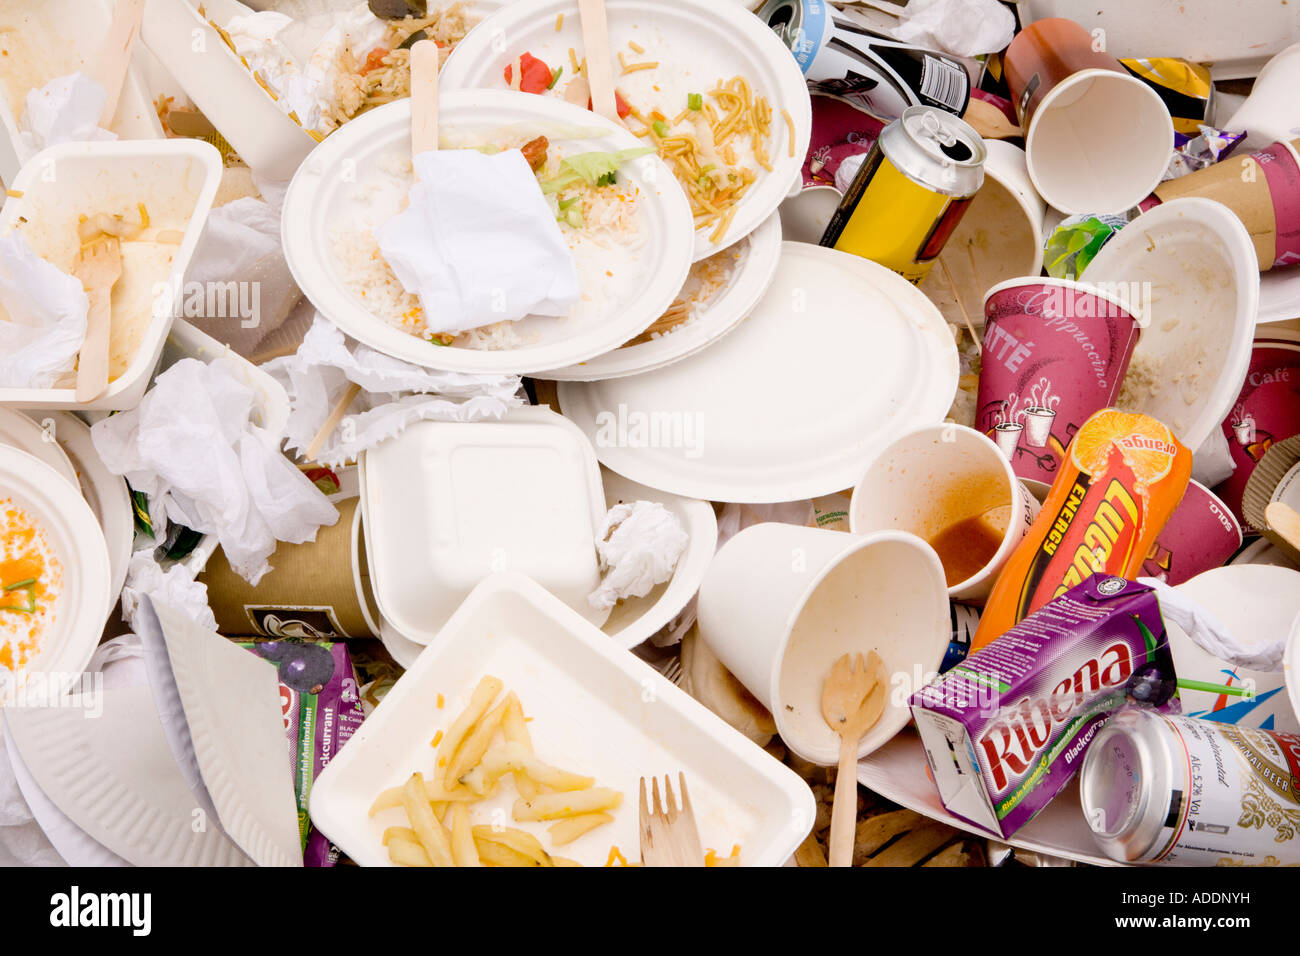 Litter rubbish in a rubbish bin waste food paper plates cups cans Stock Photo